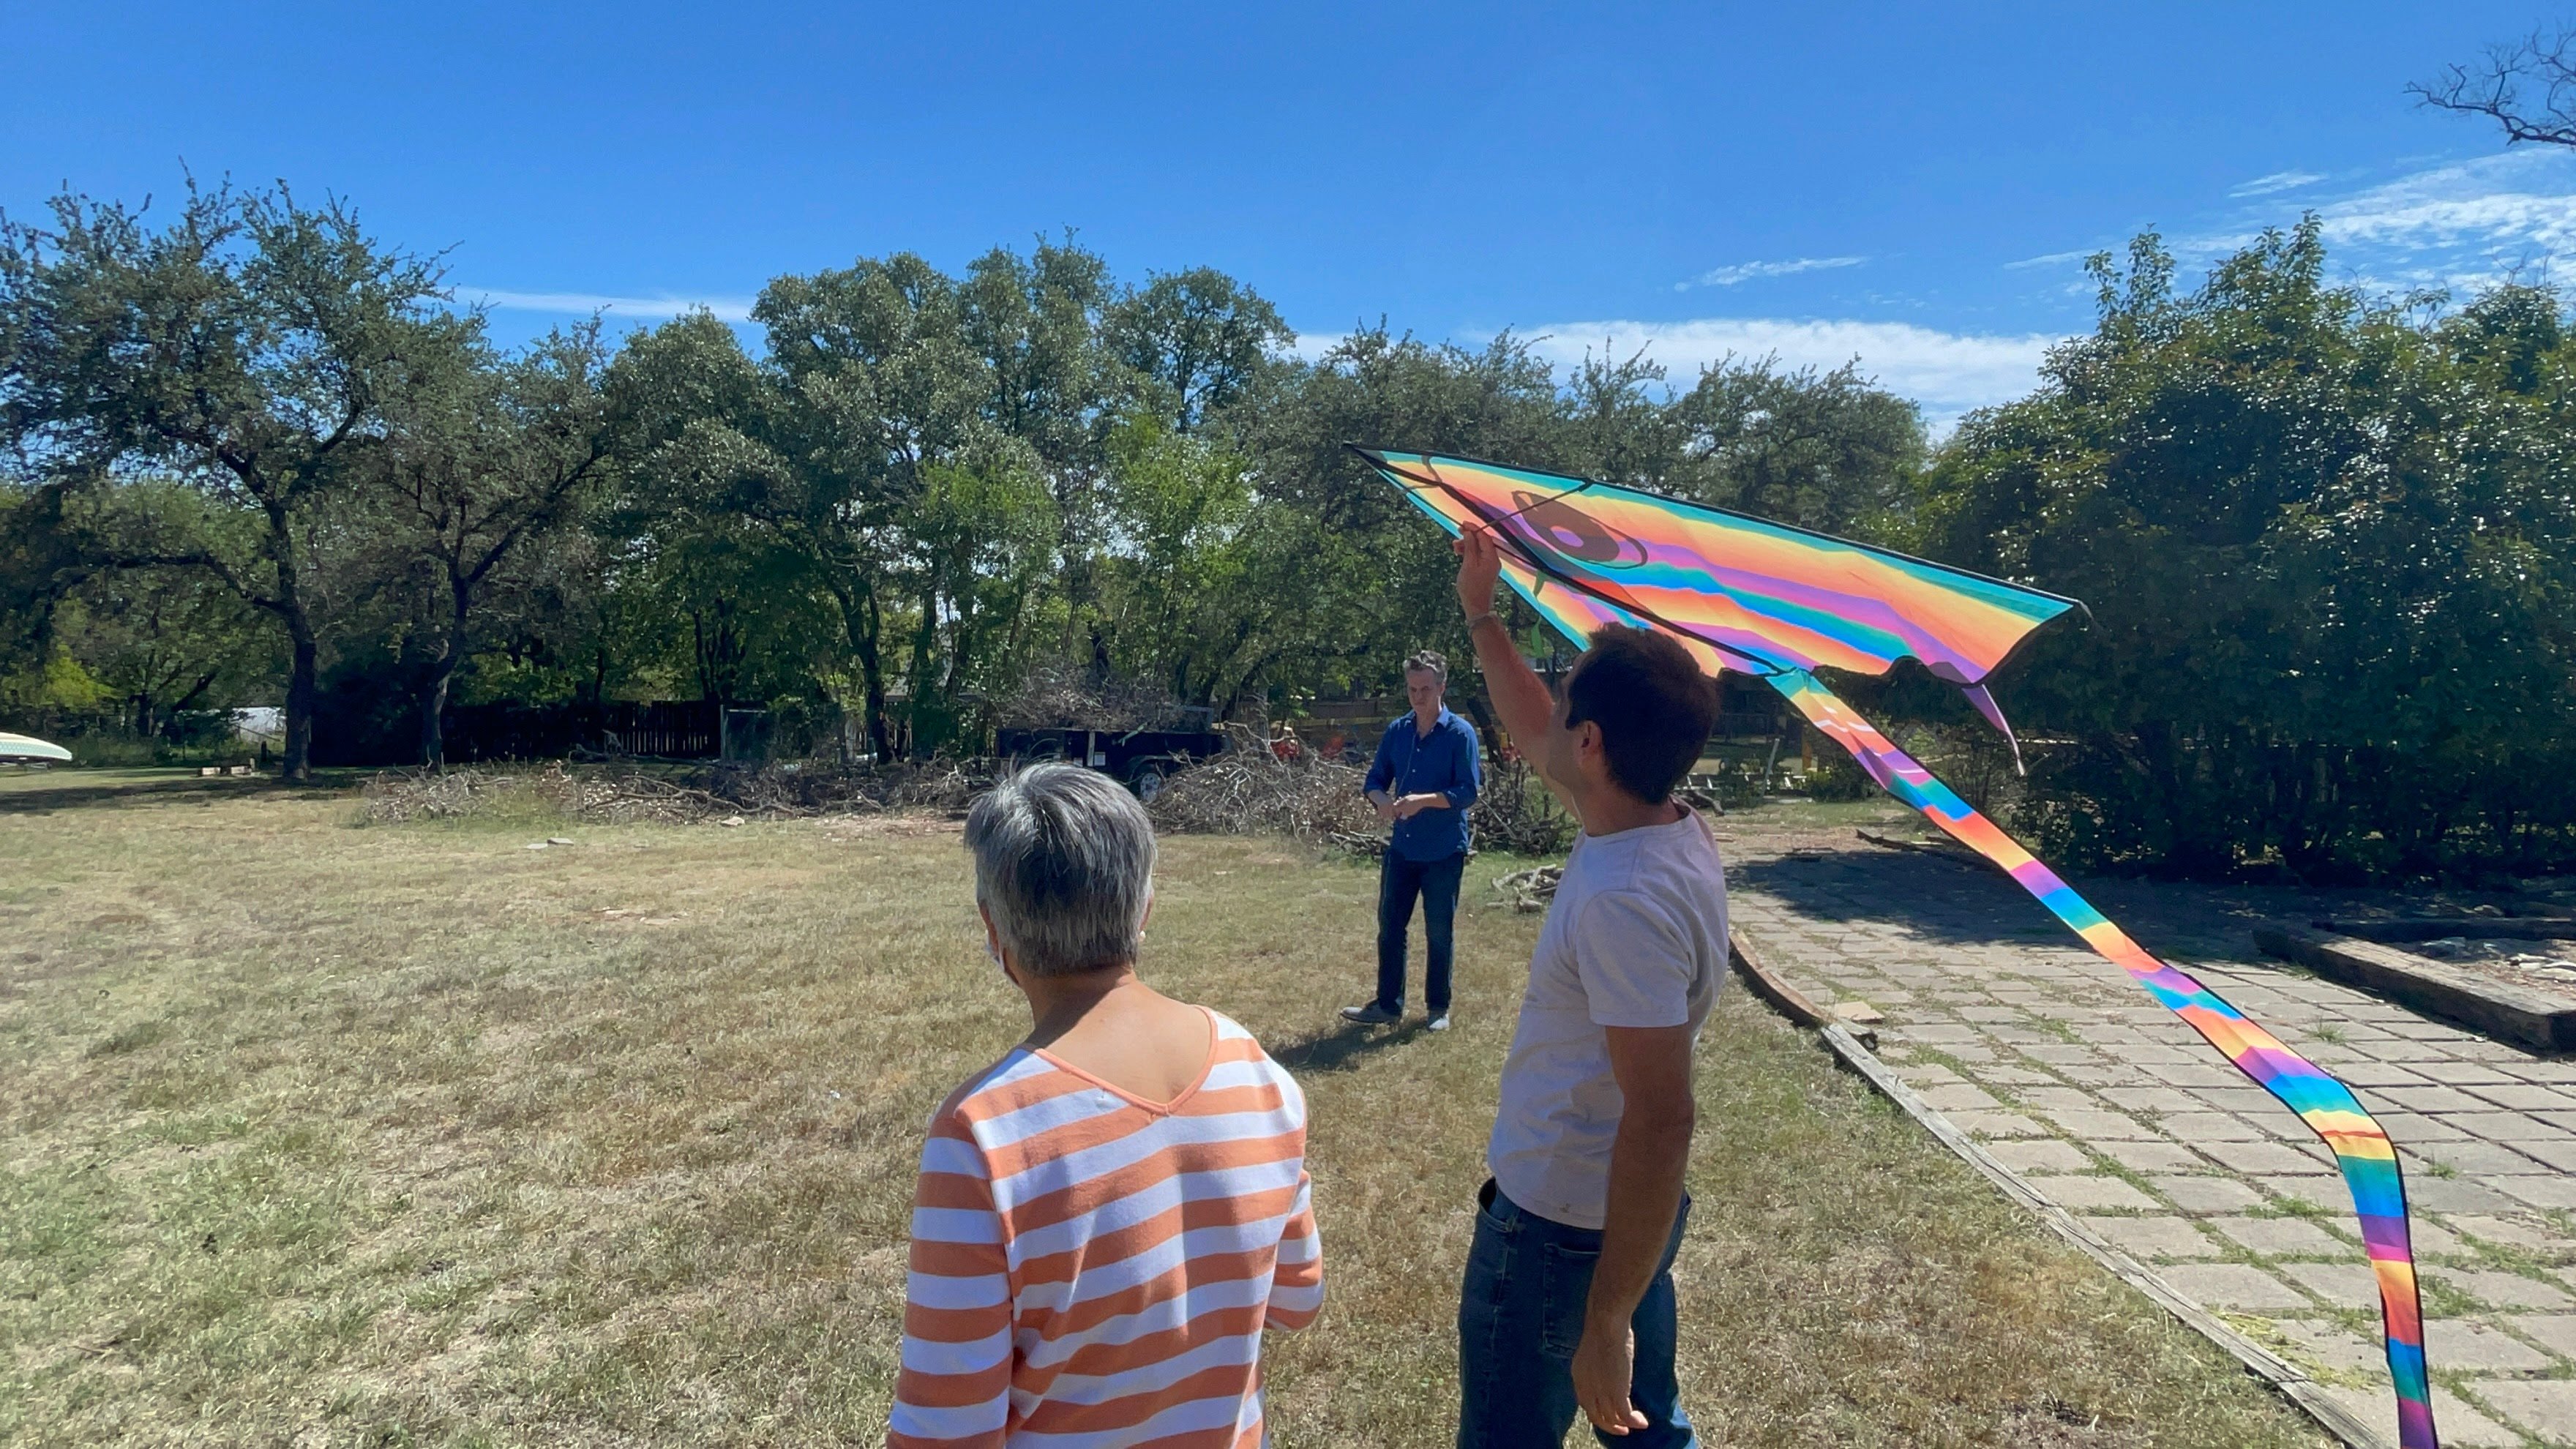 Co-founder, James McGirr and GivePulse team members standing in an open field flying a kite